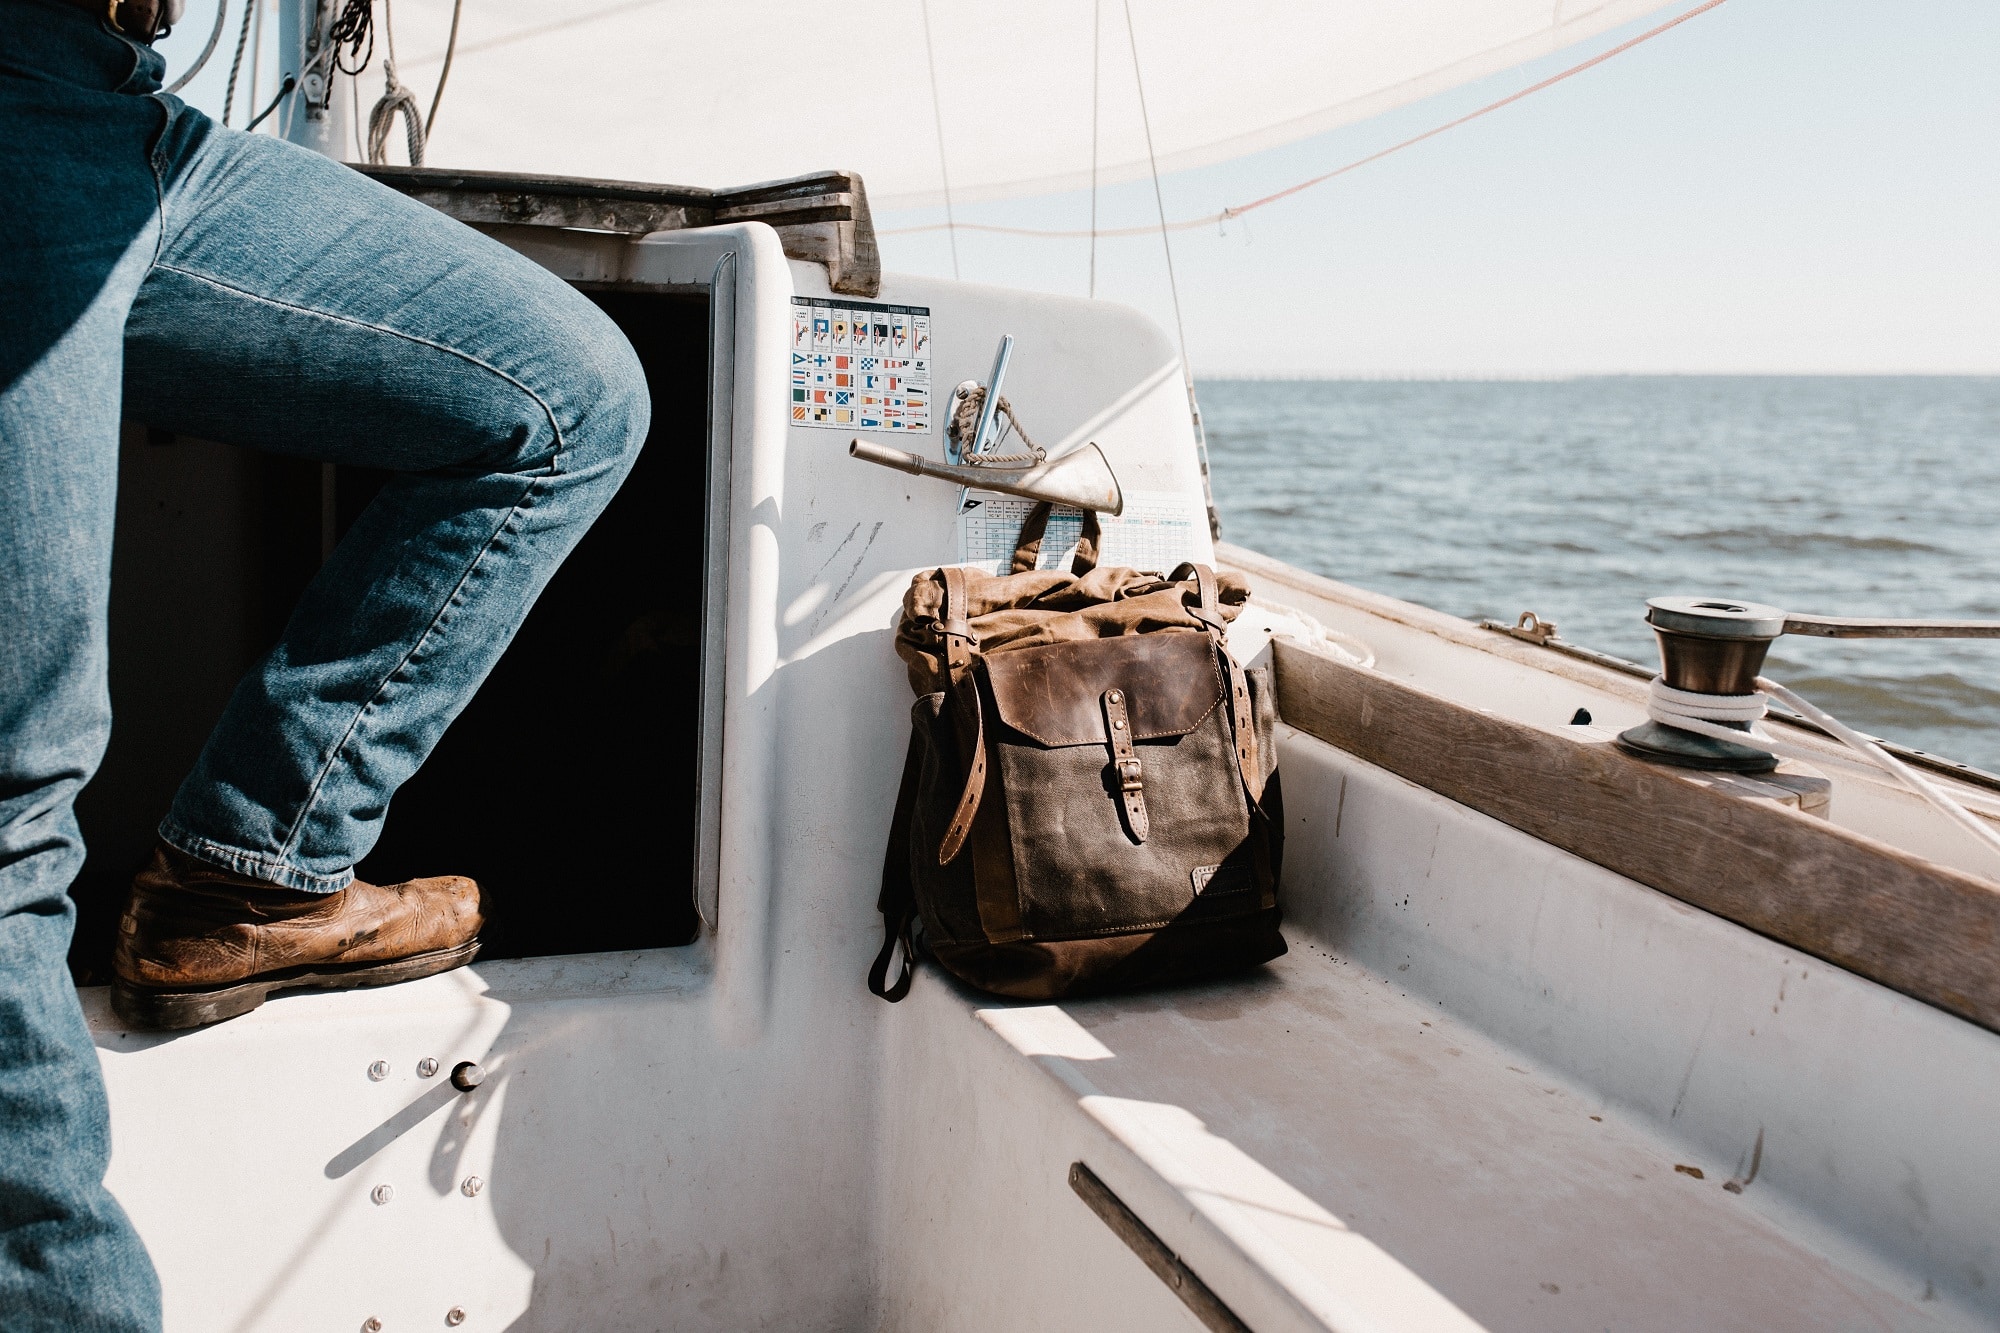 Someone wearing jeans and boots perches their leg and backpack upon the deck of a sailboat with the water in the background.